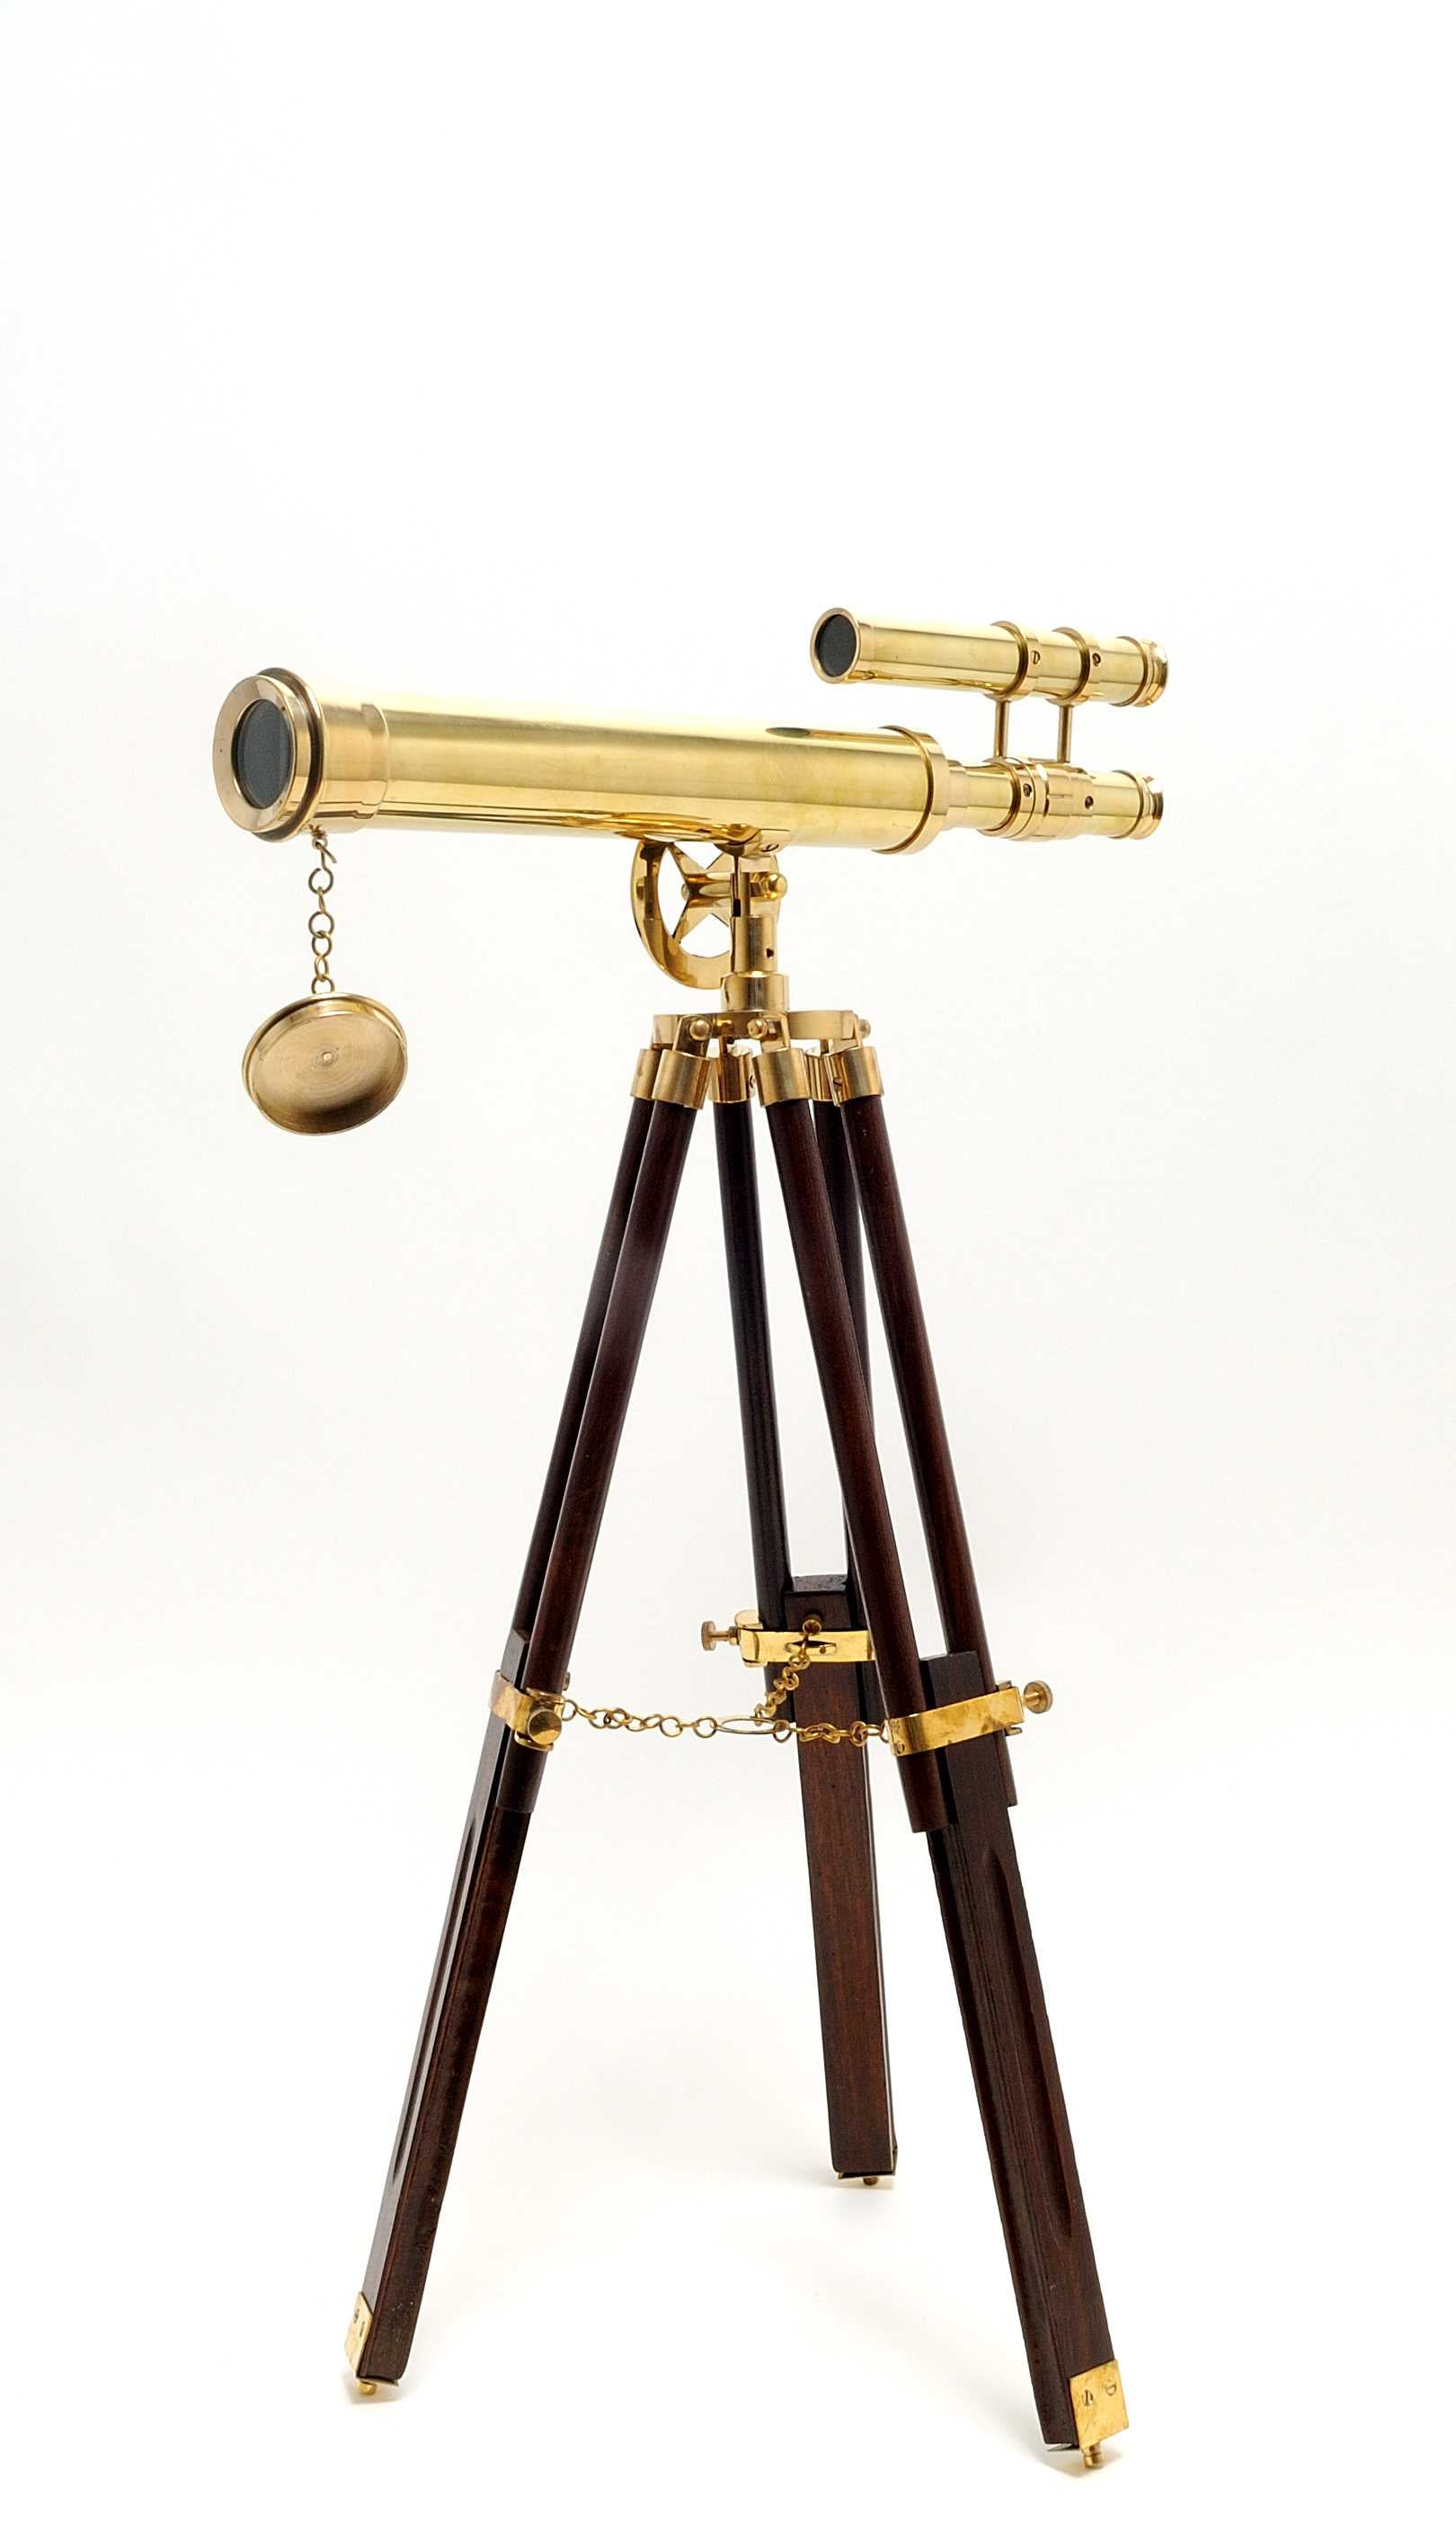 2.25" X 17.5" X 26" Telescope With Stand